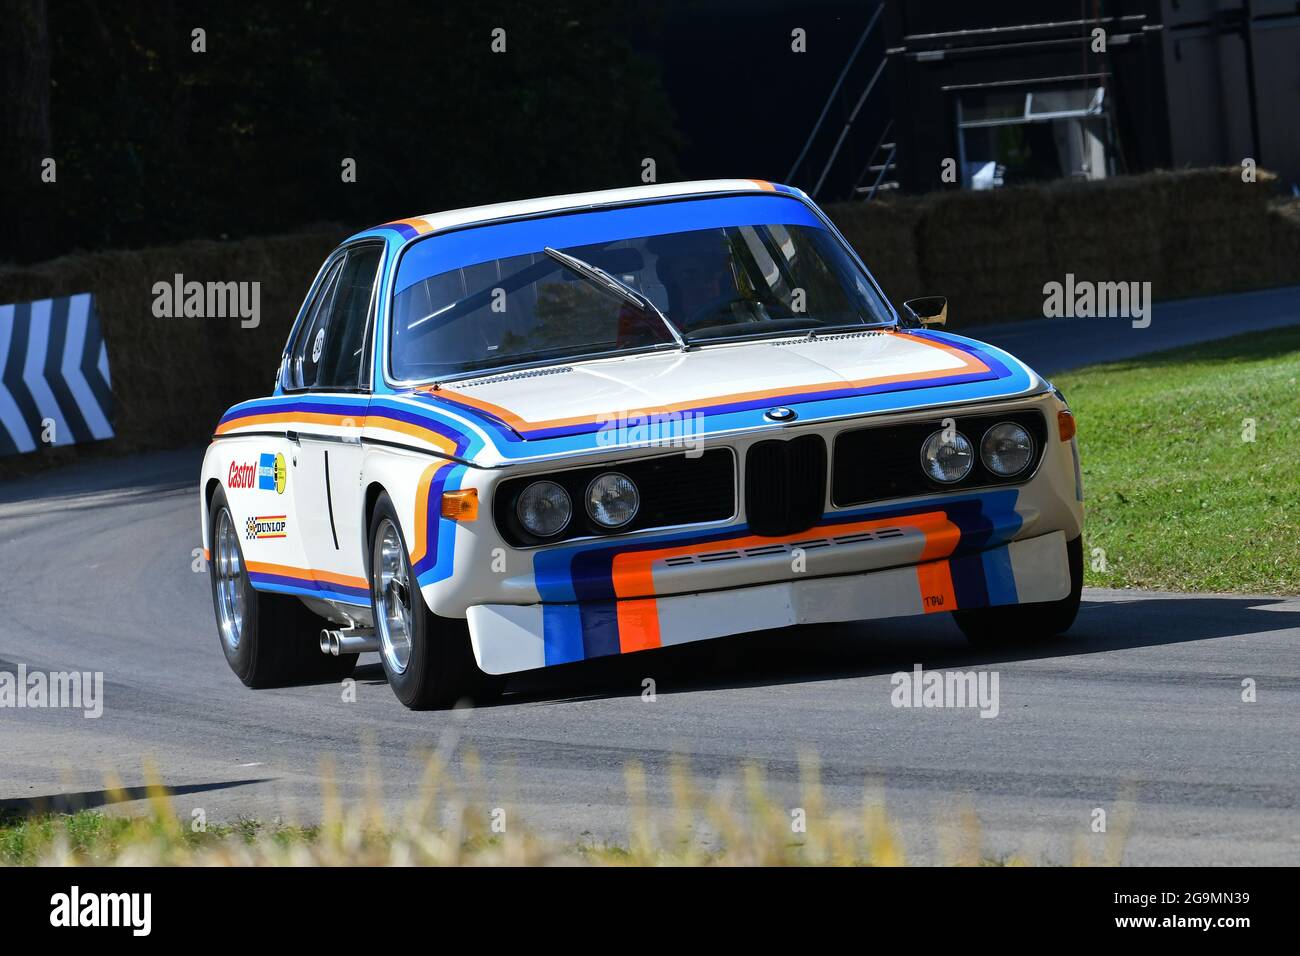 Alex Elliott, BMW 3 litre CSL, Batmobile, Great All-Rounders - Jacky Ickx, The Maestros - Motorsport's Great All-Rounders, Goodwood Festival of Speed, Stock Photo